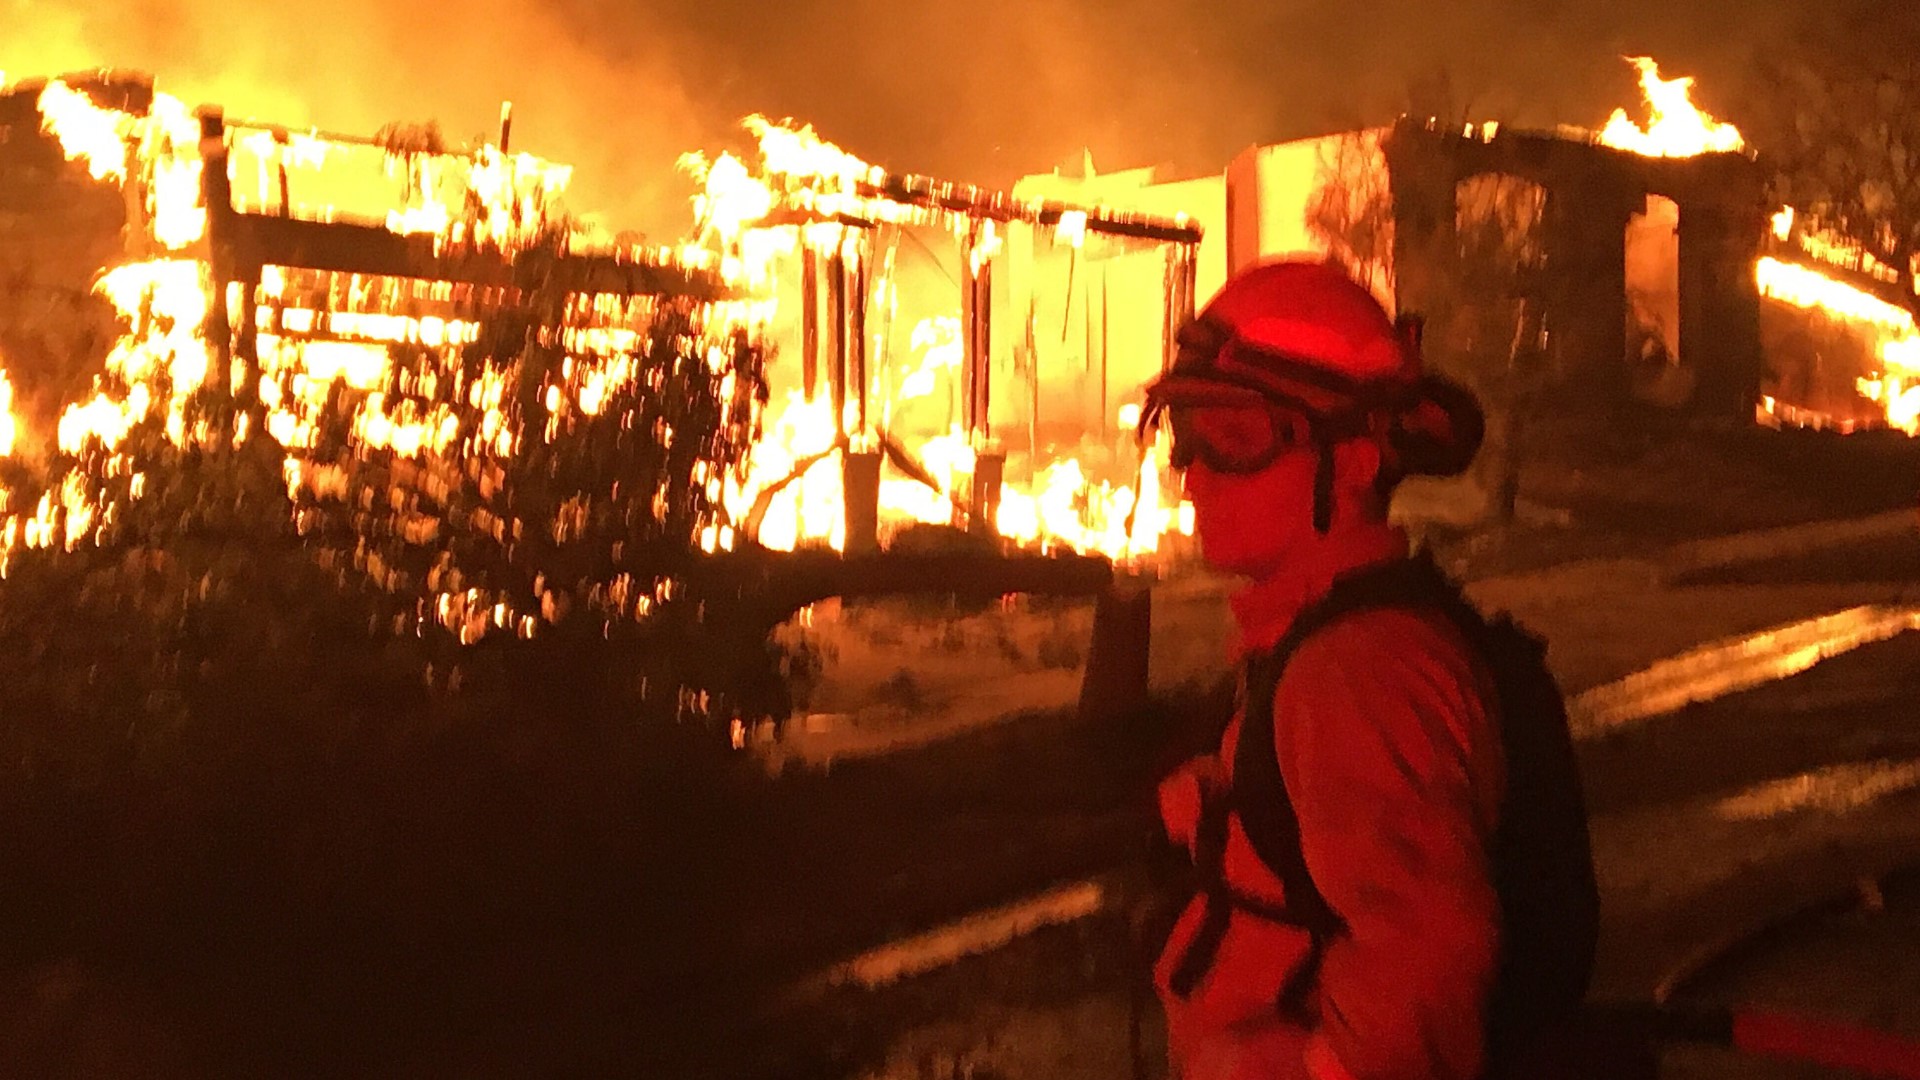 Some firefighters have been away from their home base for 40 to 50 days with only a few days of rest in between.